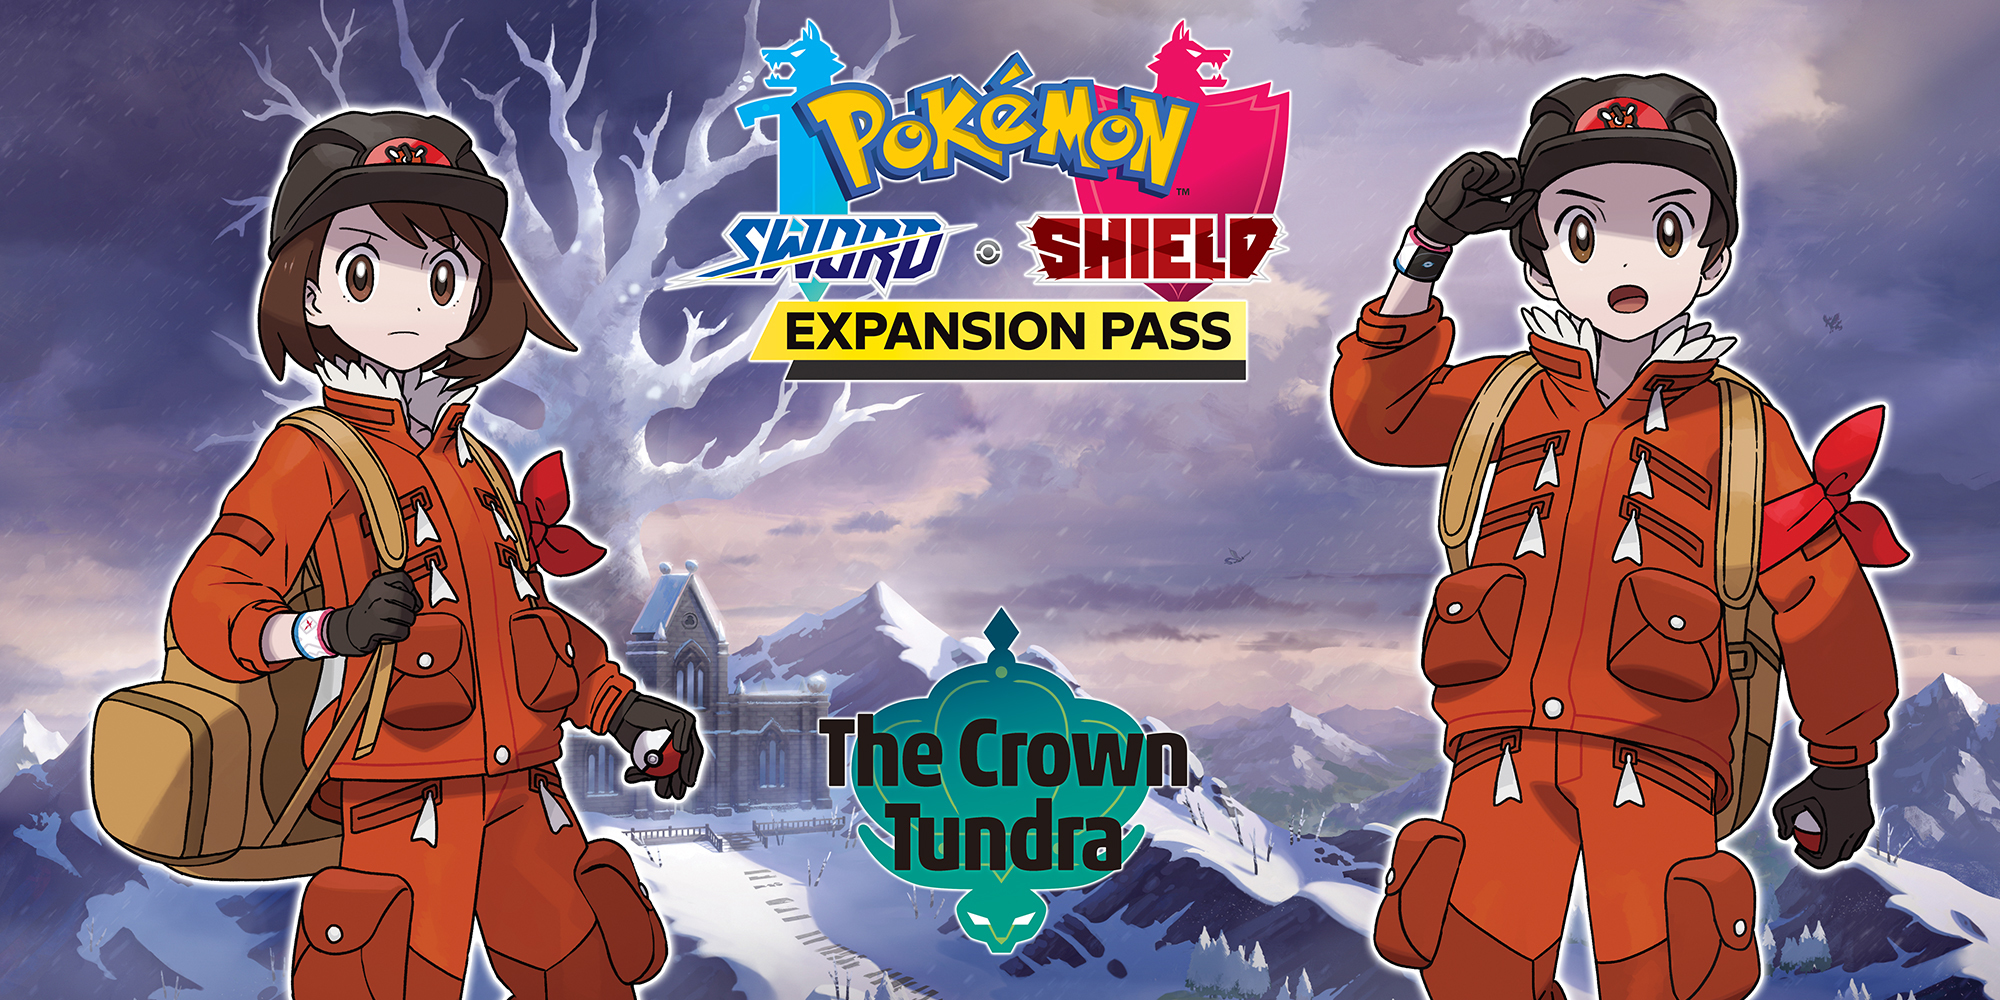 Pokémon Sword and Shield' Expansion Pass Will Launch in June 2020